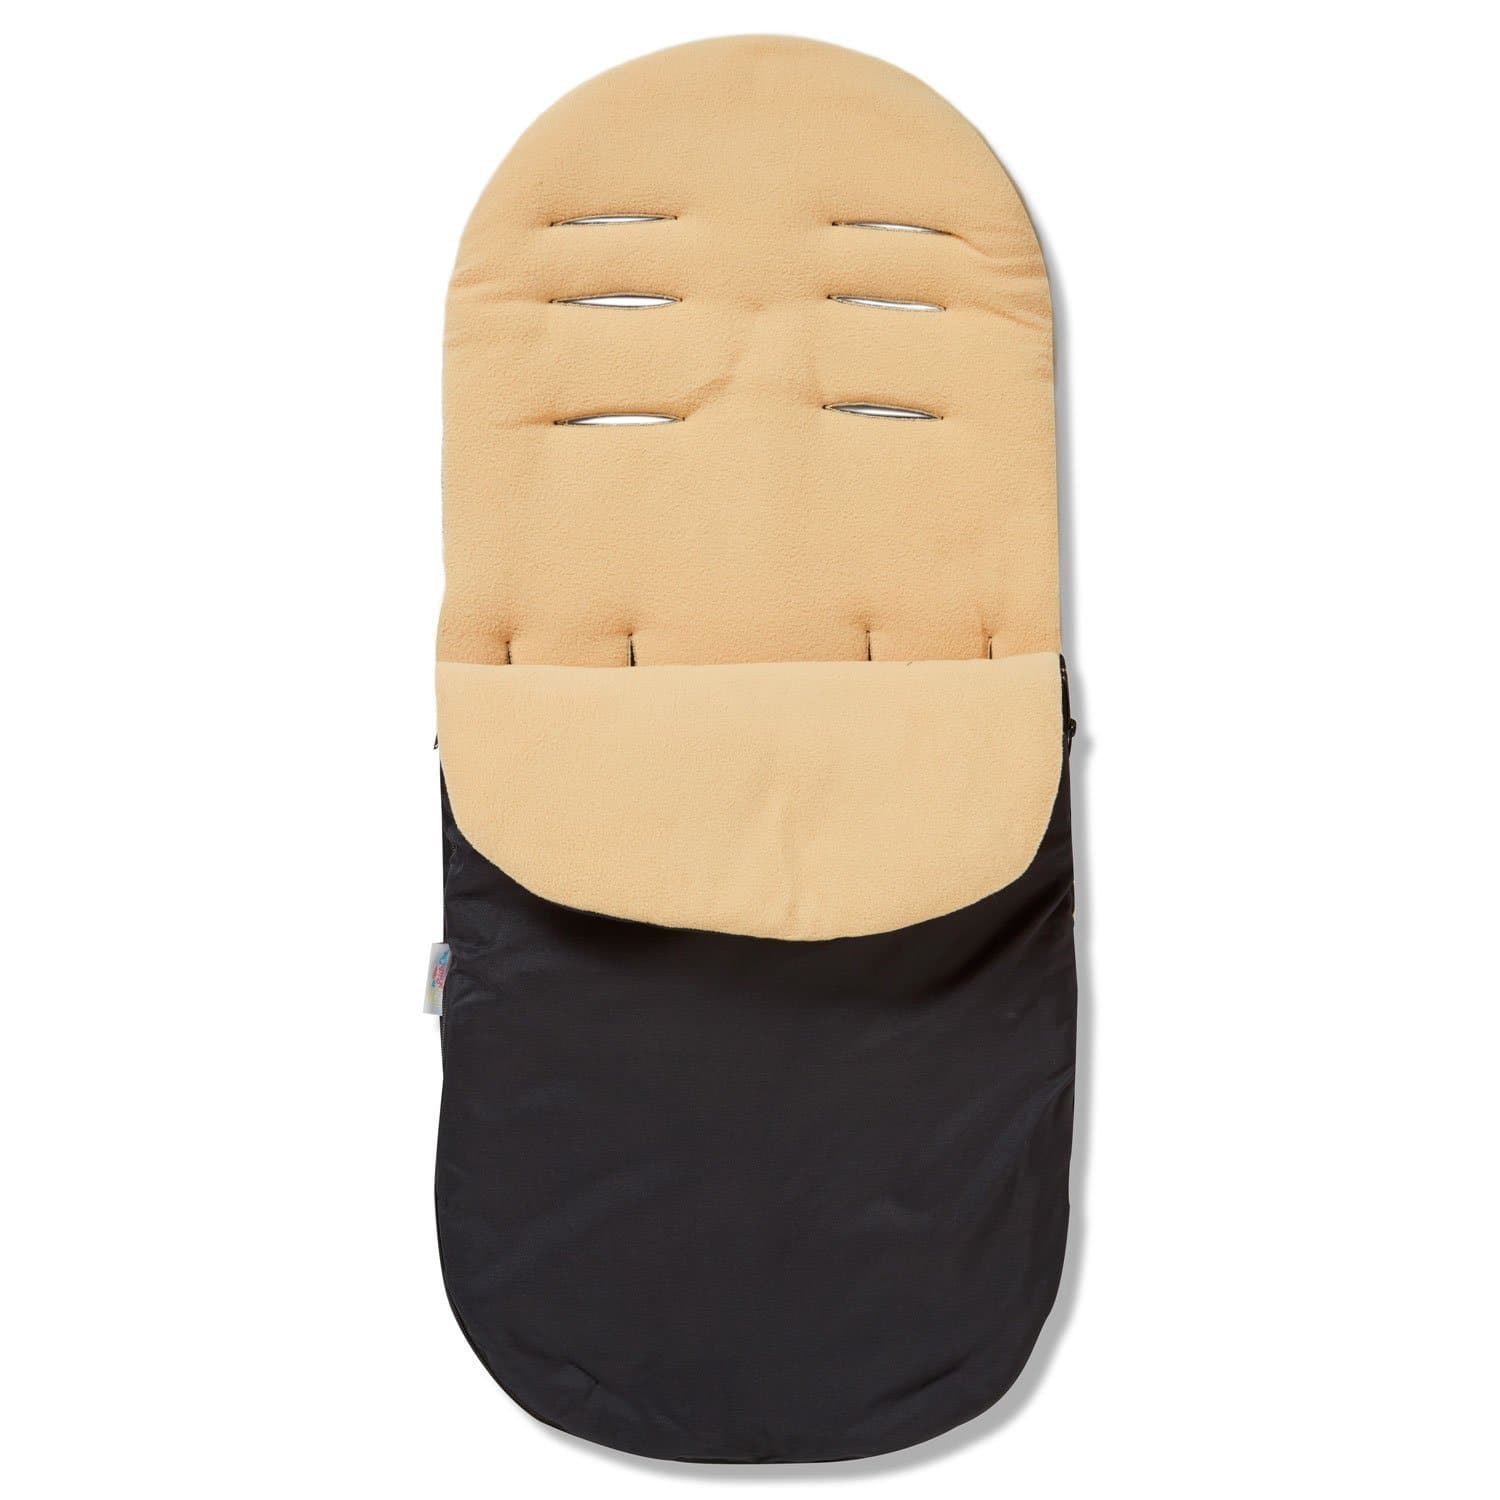 Footmuff / Cosy Toes Compatible with Pericles - Sand / Fits All Models | For Your Little One